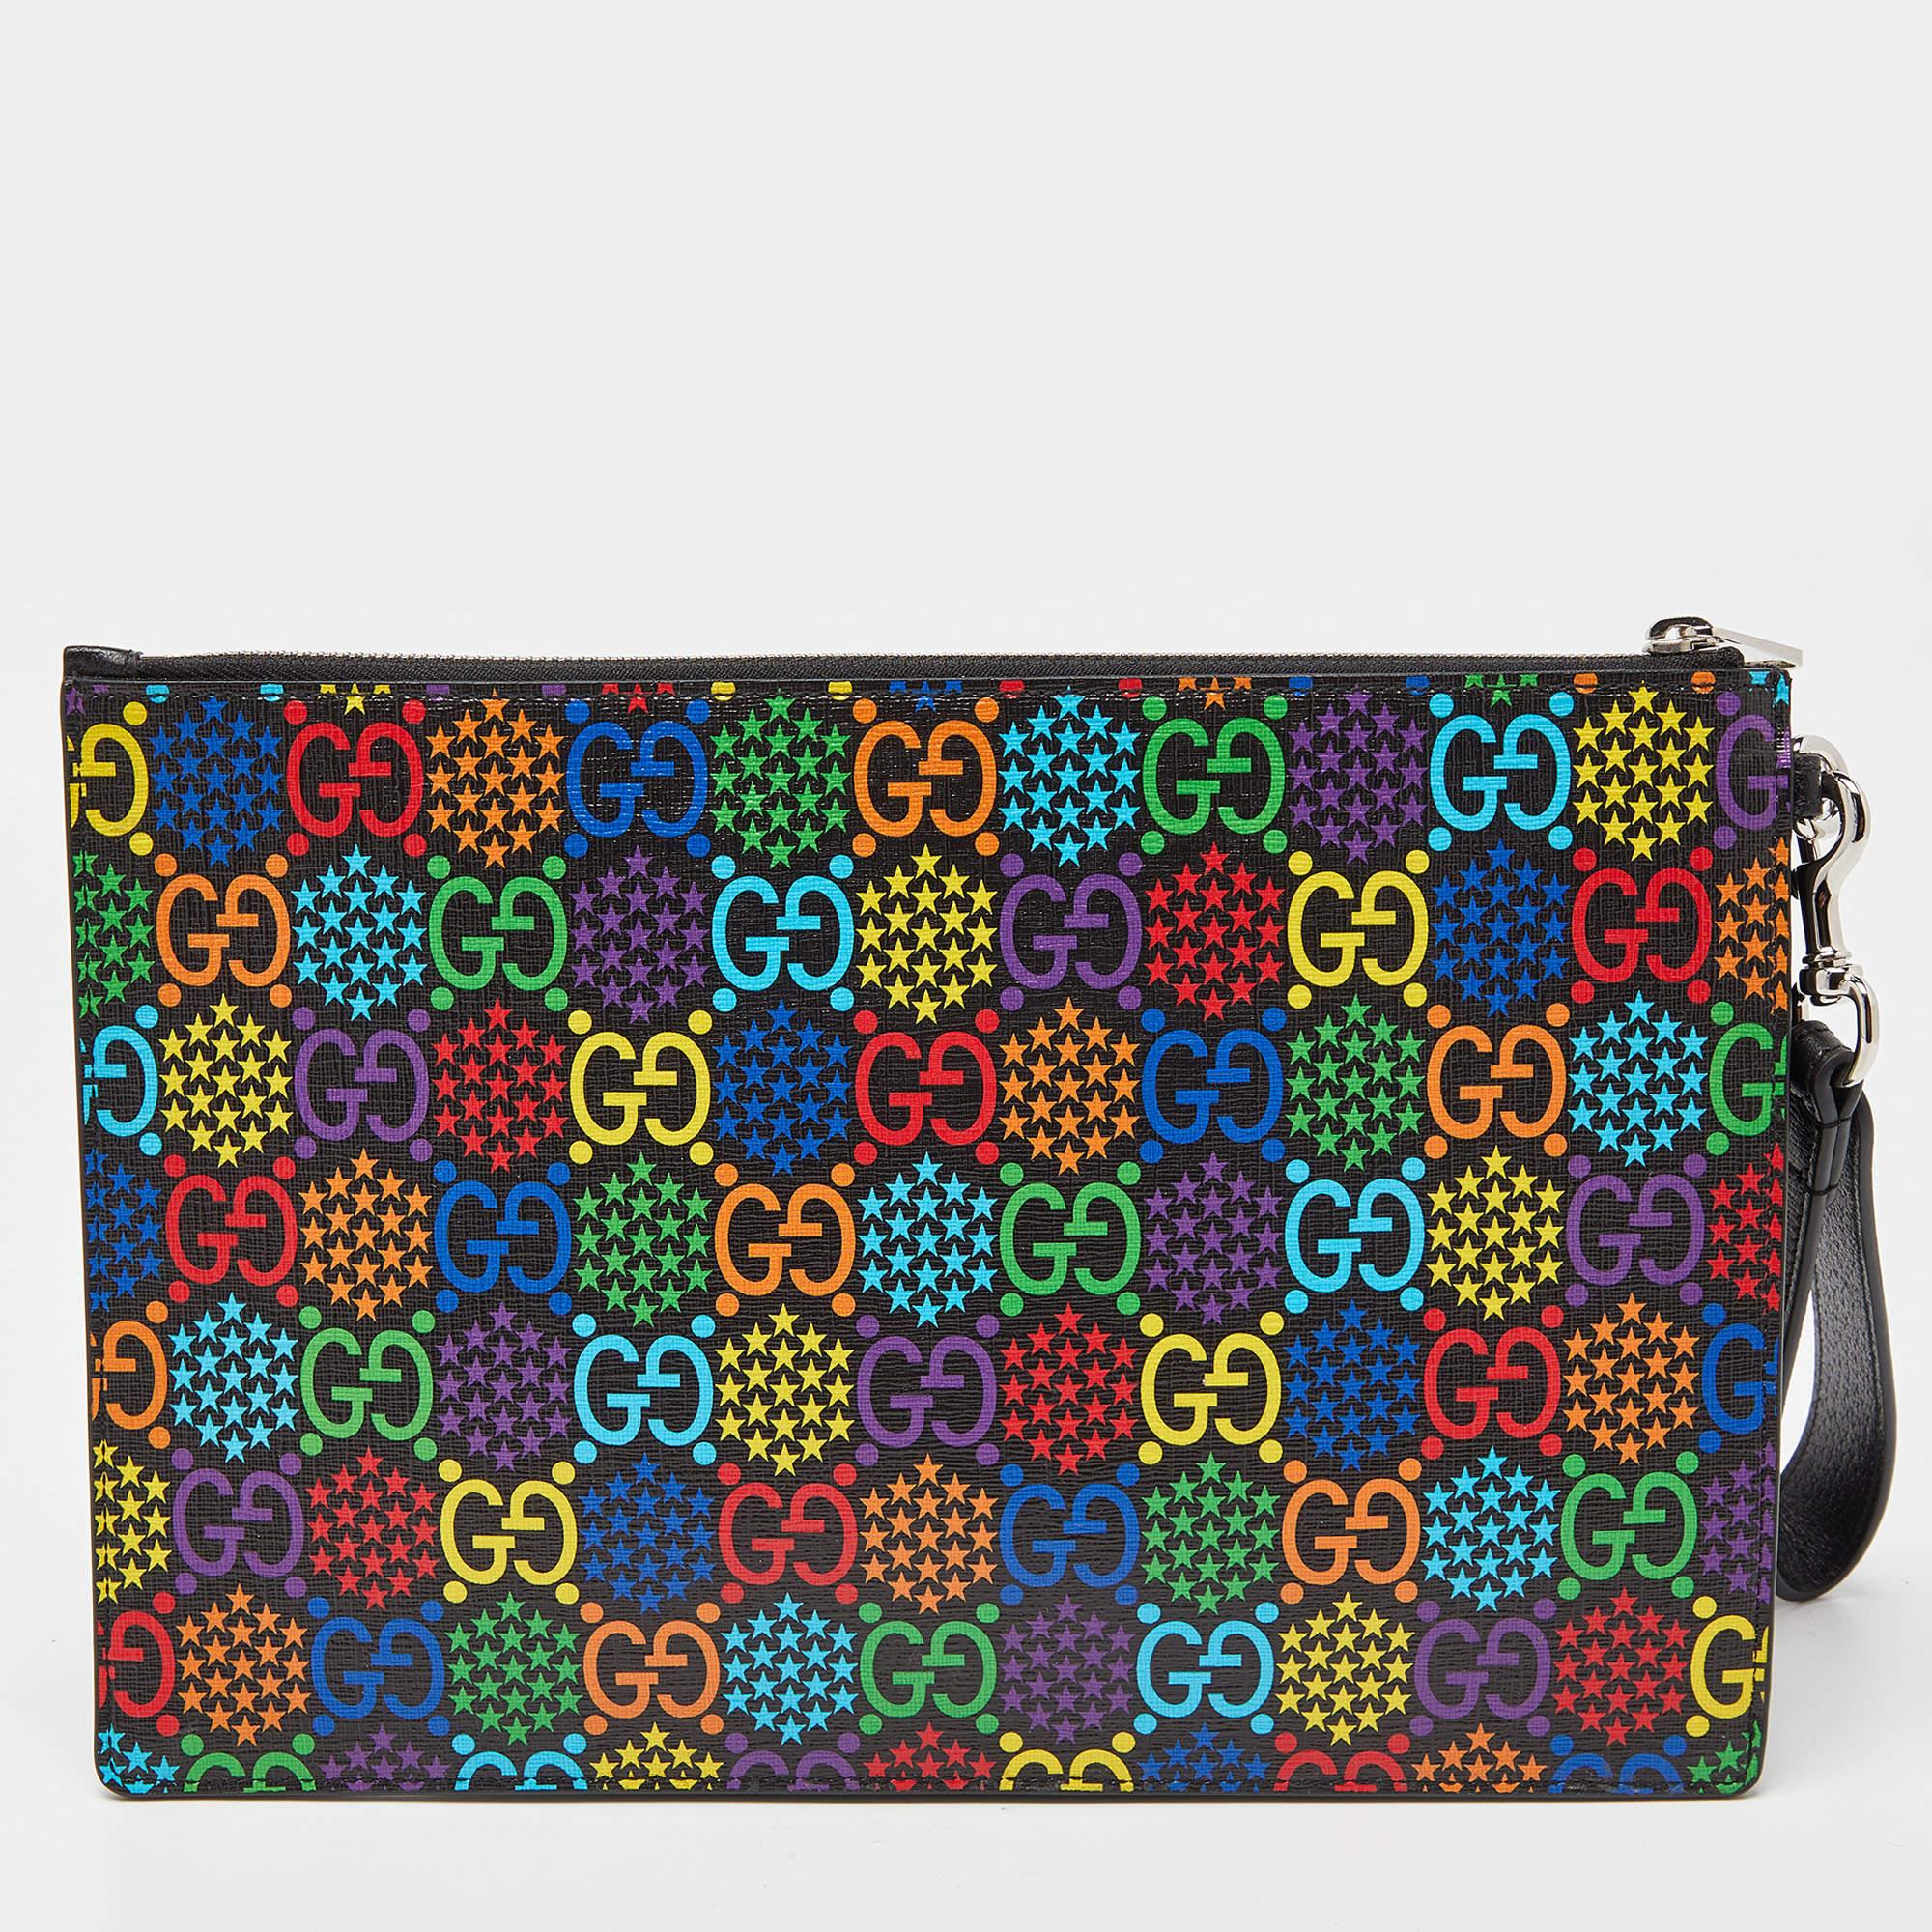 The Gucci Psychedelic wristlet clutch is a vibrant and compact accessory. It features the iconic GG Supreme canvas with a psychedelic twist, complemented by leather detailing. The wristlet allows for easy carrying, making it a stylish and practical